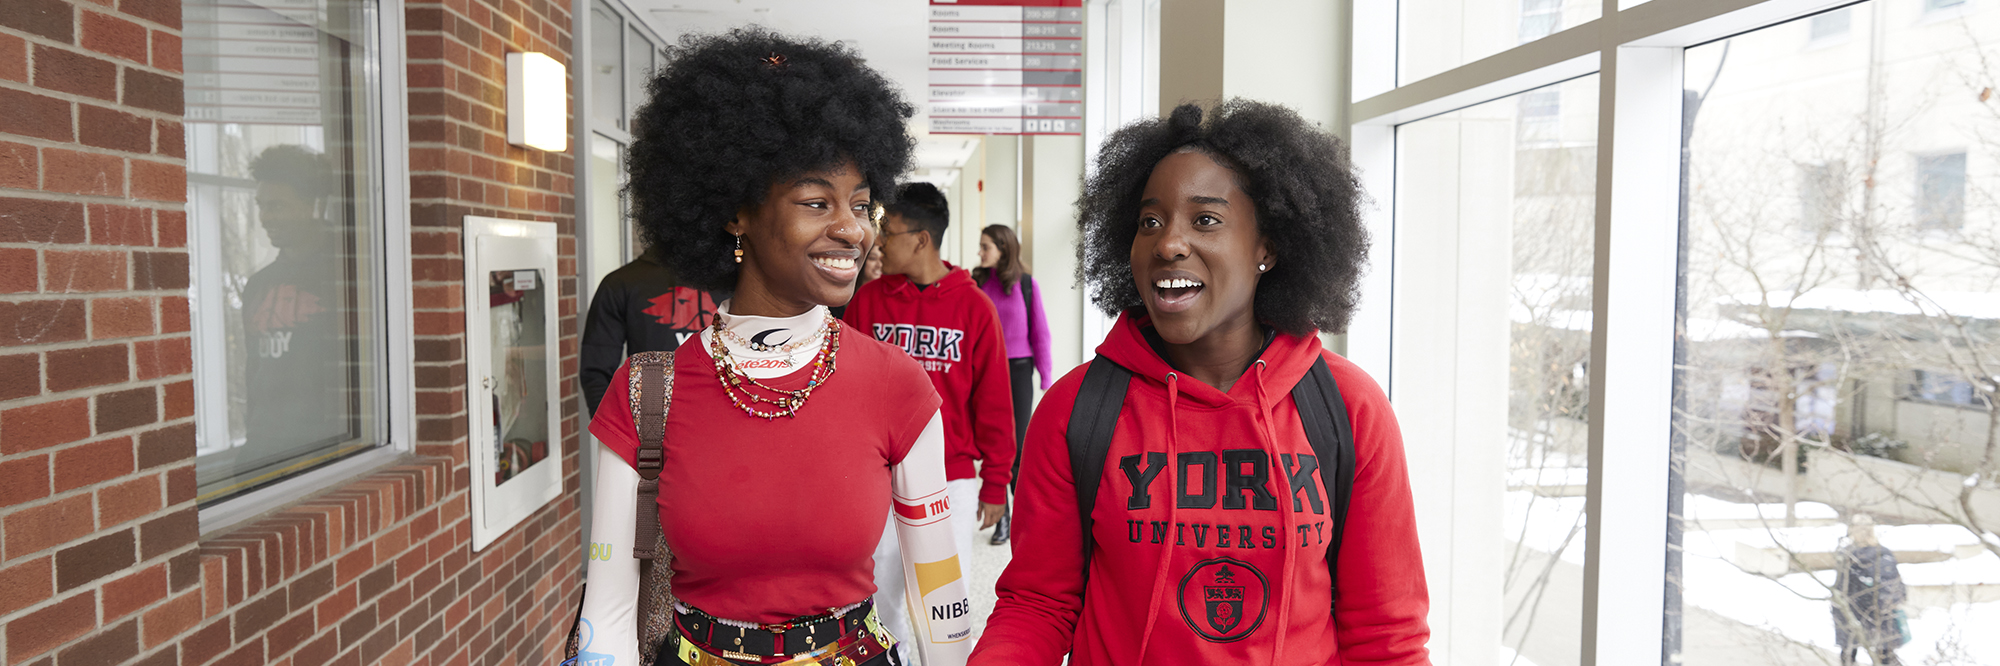 Two Black students walking inside on York's Keele Campus